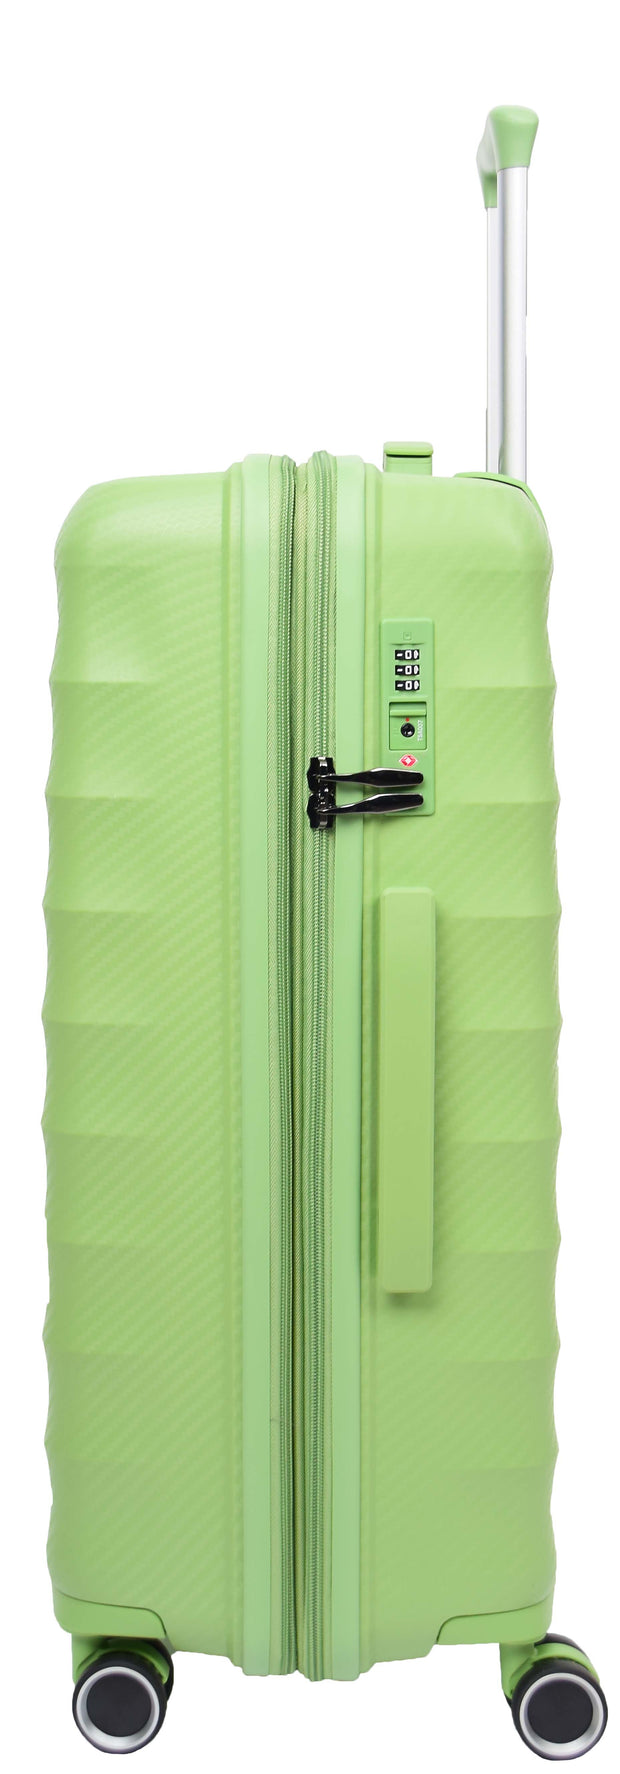 8 Wheel Spinner Luggage Expandable Arcturus Lime Green 8